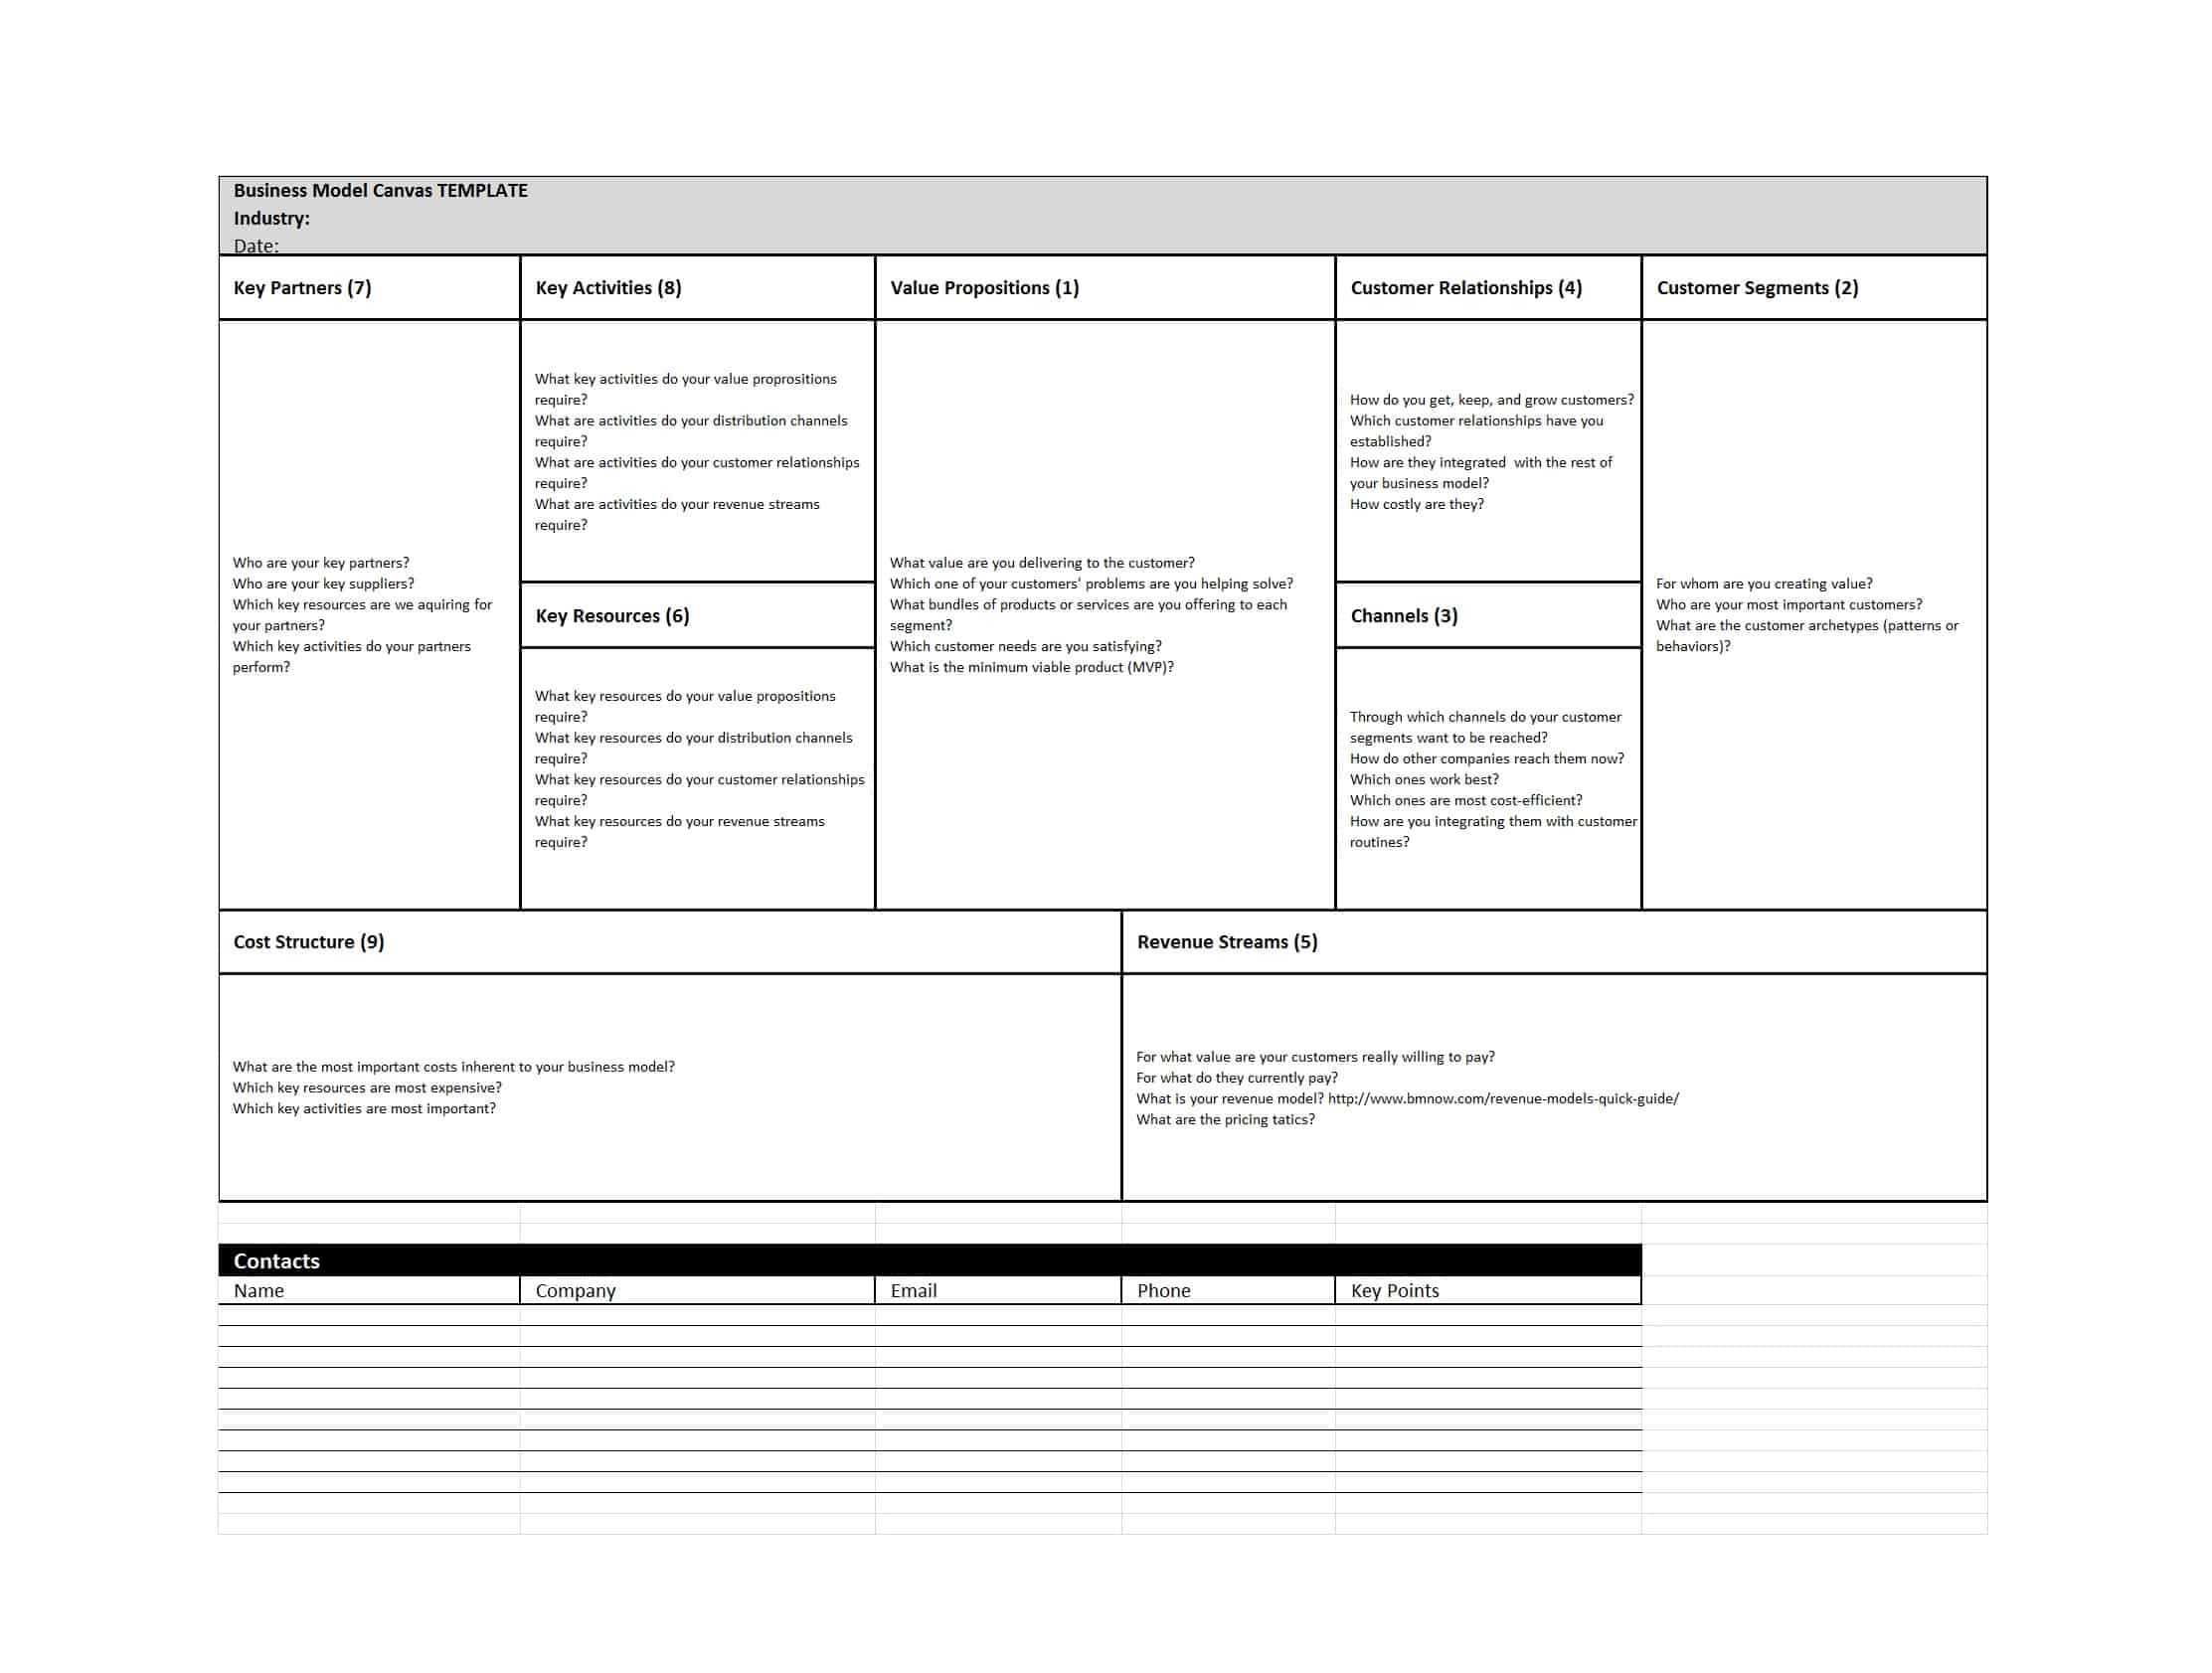 50 Amazing Business Model Canvas Templates ᐅ Templatelab Pertaining To Business Model Canvas Template Word